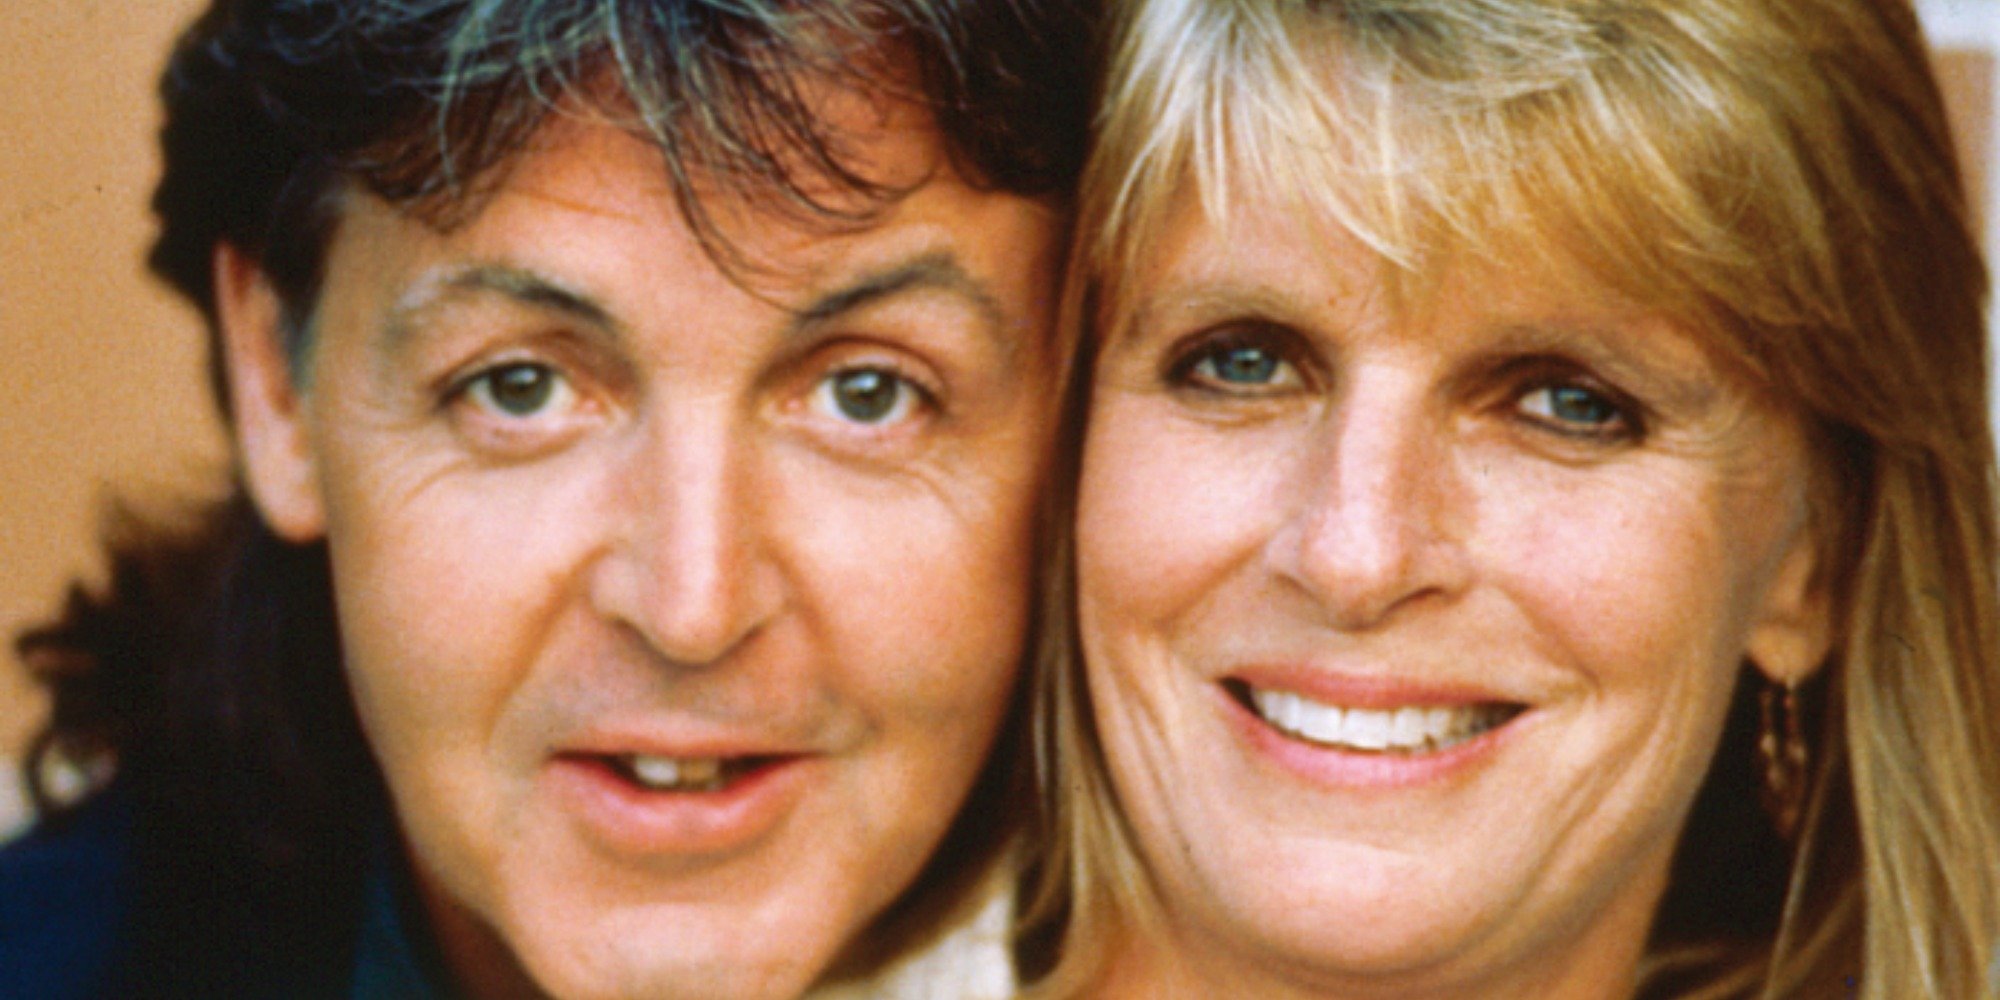 Paul and Linda McCartney pose with their heads together in a color photograph.